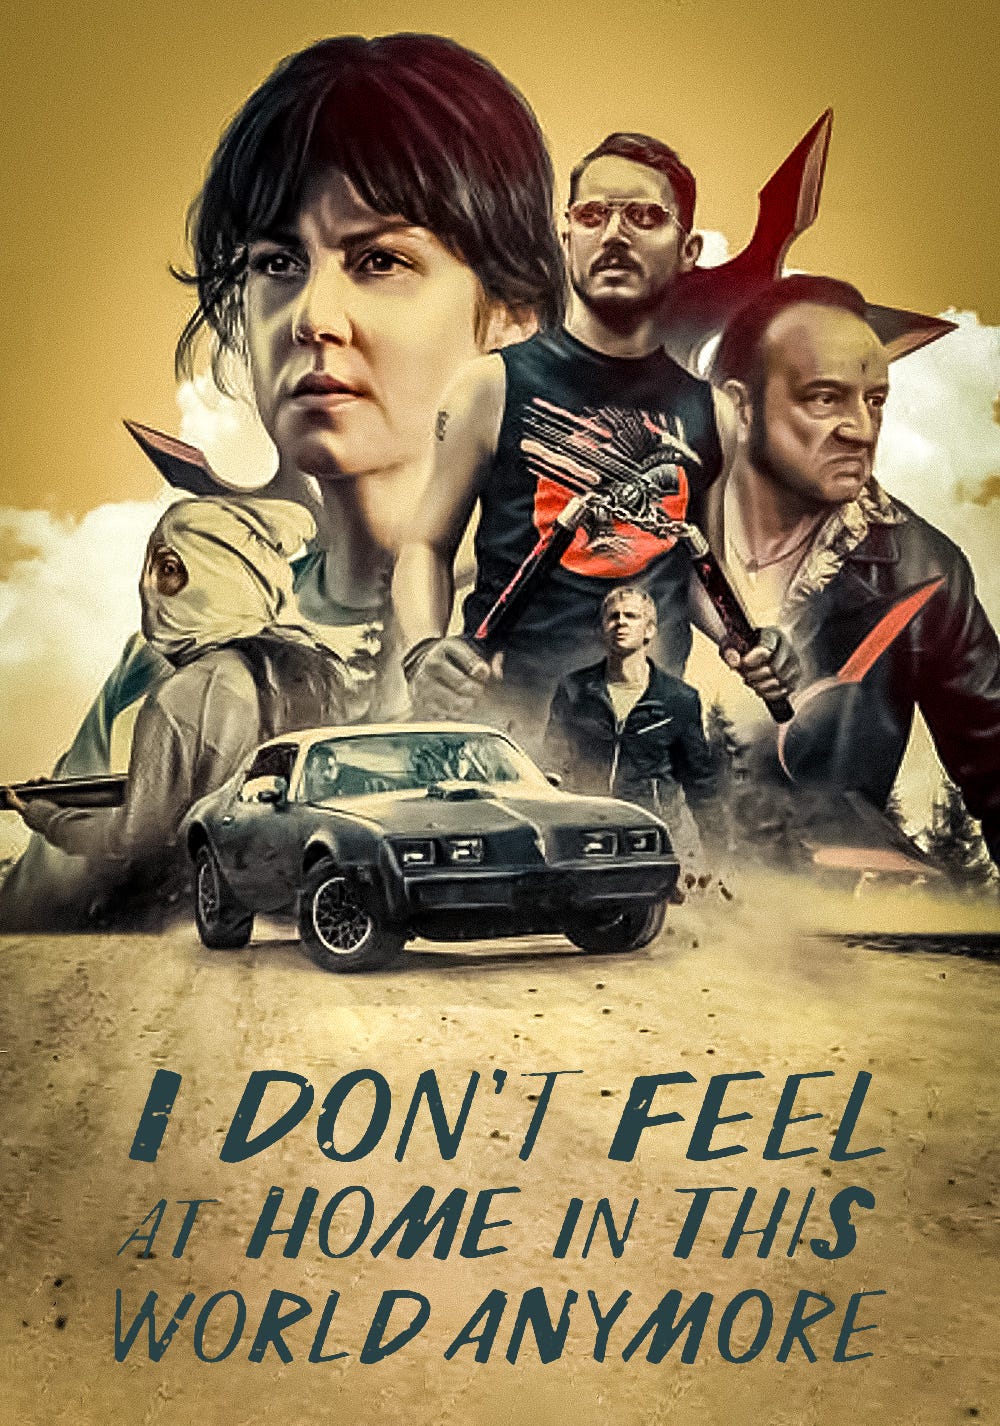 I Don't Feel at Home in This World Anymore-áá¡ á¡á£á áááá¡ á¨ááááá